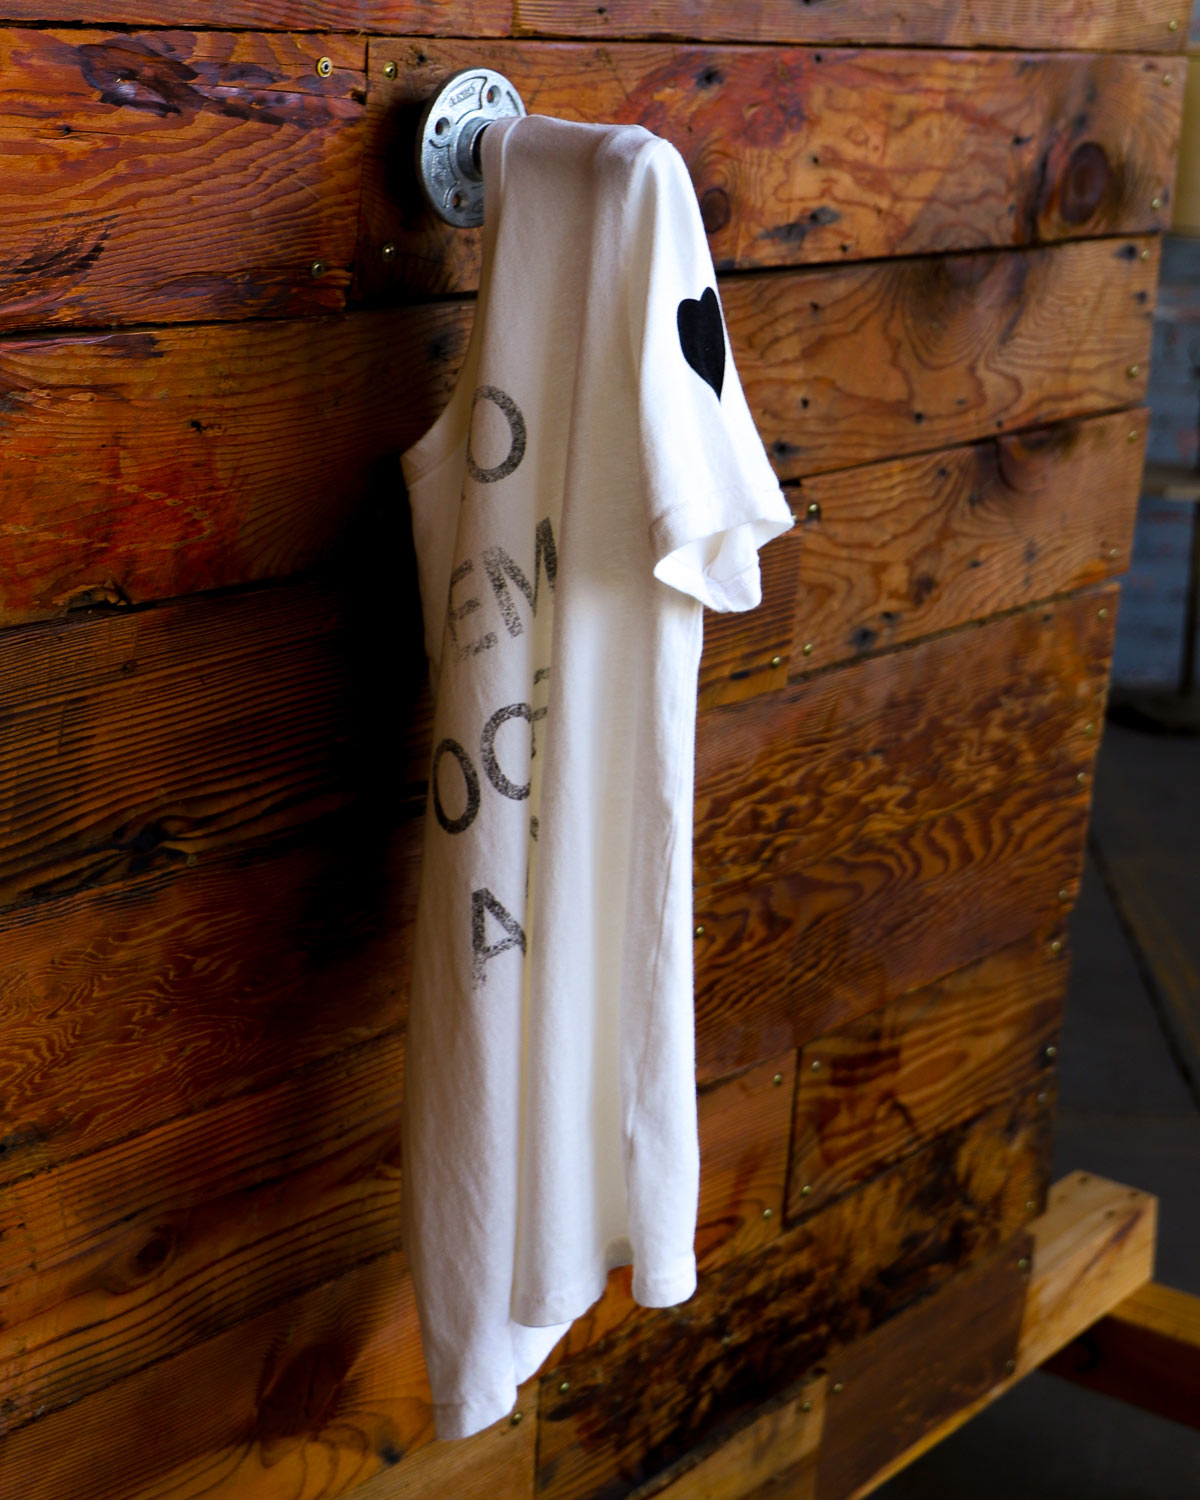 Pro democracy graphic tee in vintage white hanging on wood wall